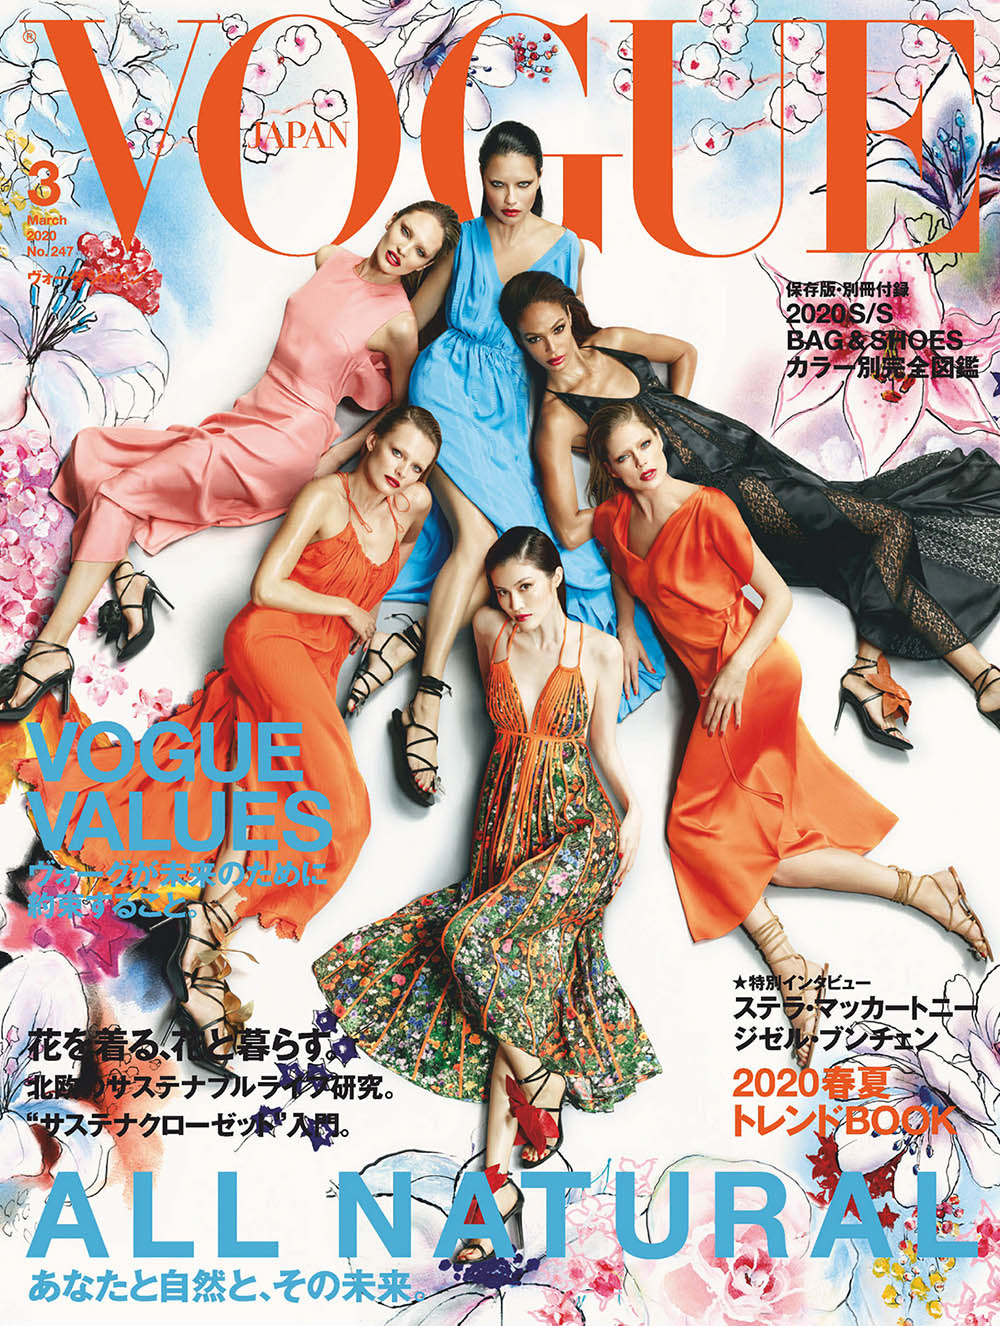 Vogue Japan March 2020 covers by Luigi & Iango